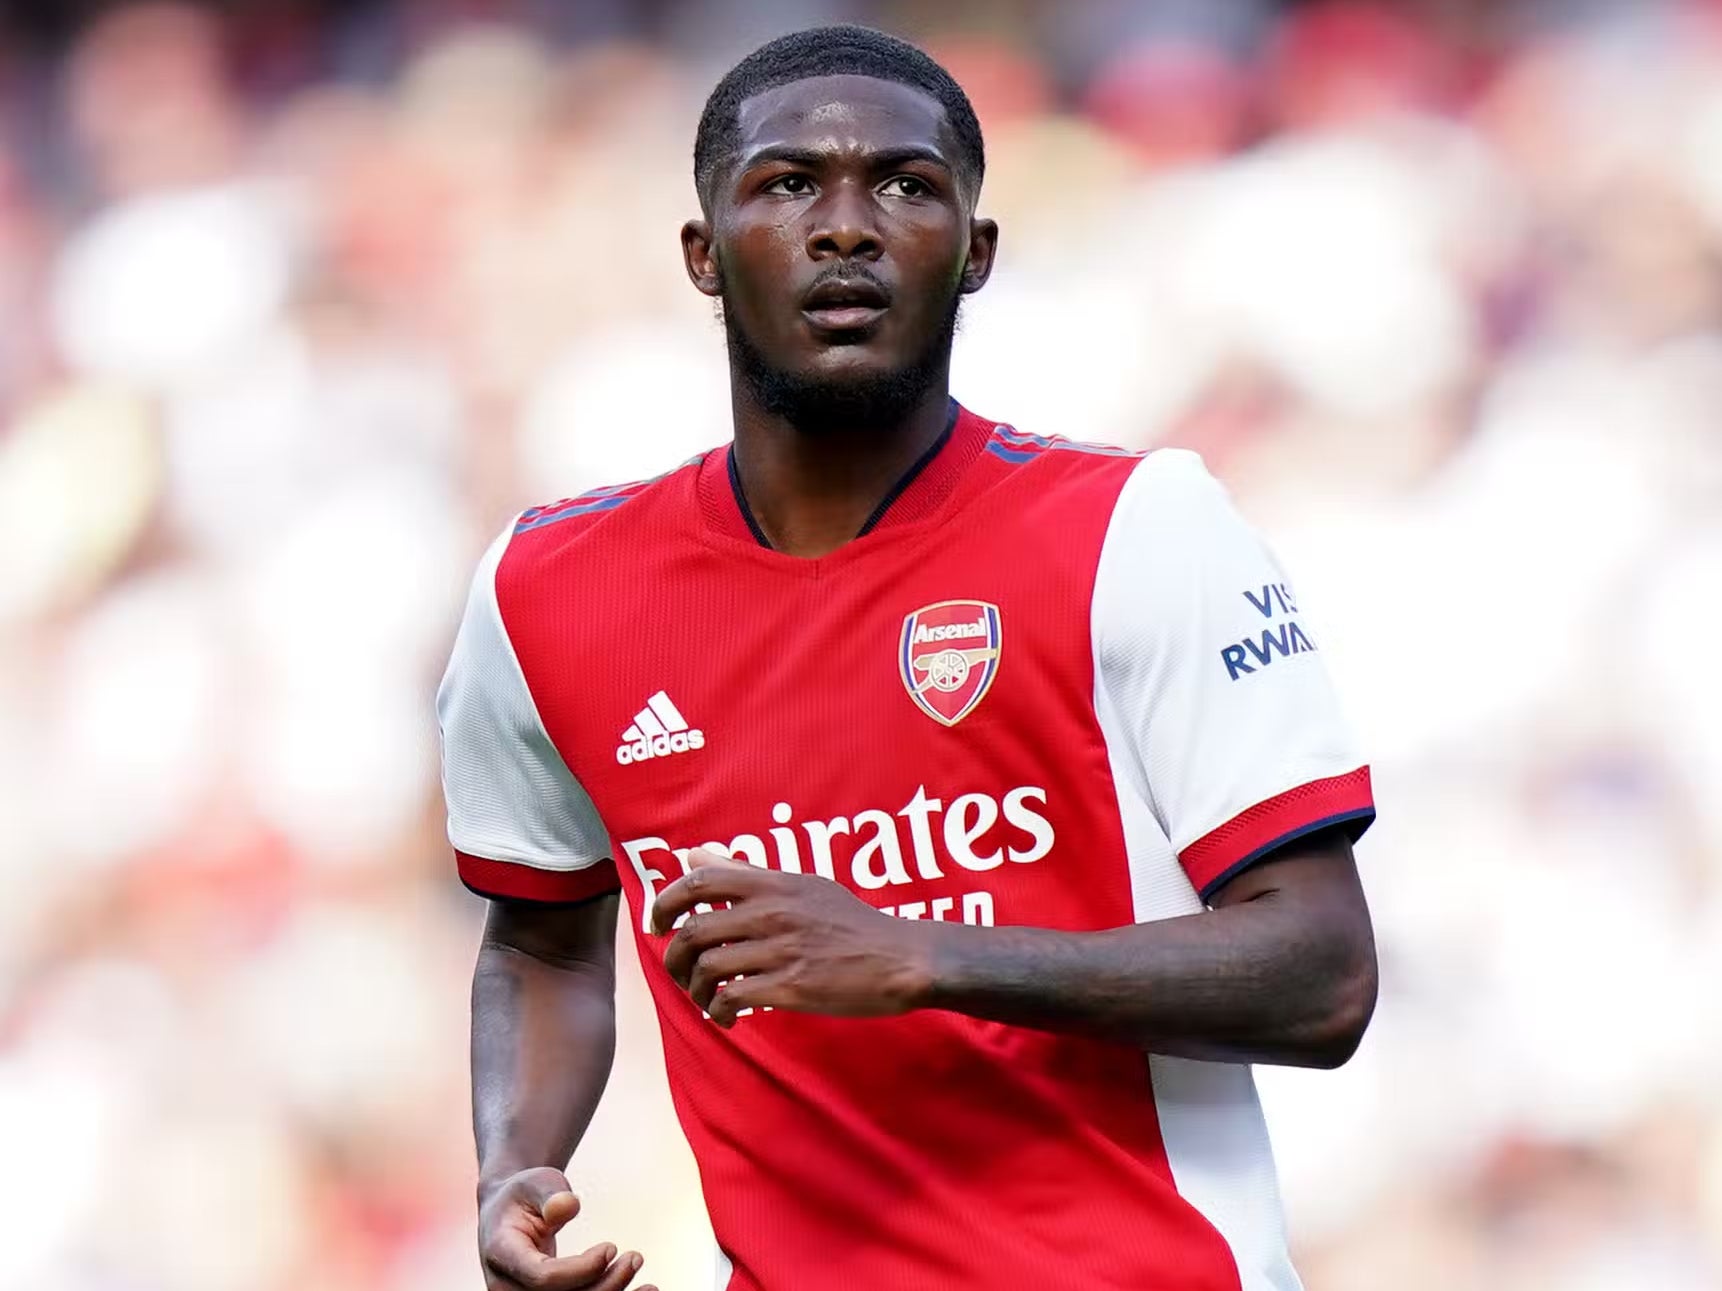 Ainsley Maitland-Niles is set for a move to Southampton (Tess Derry/PA)